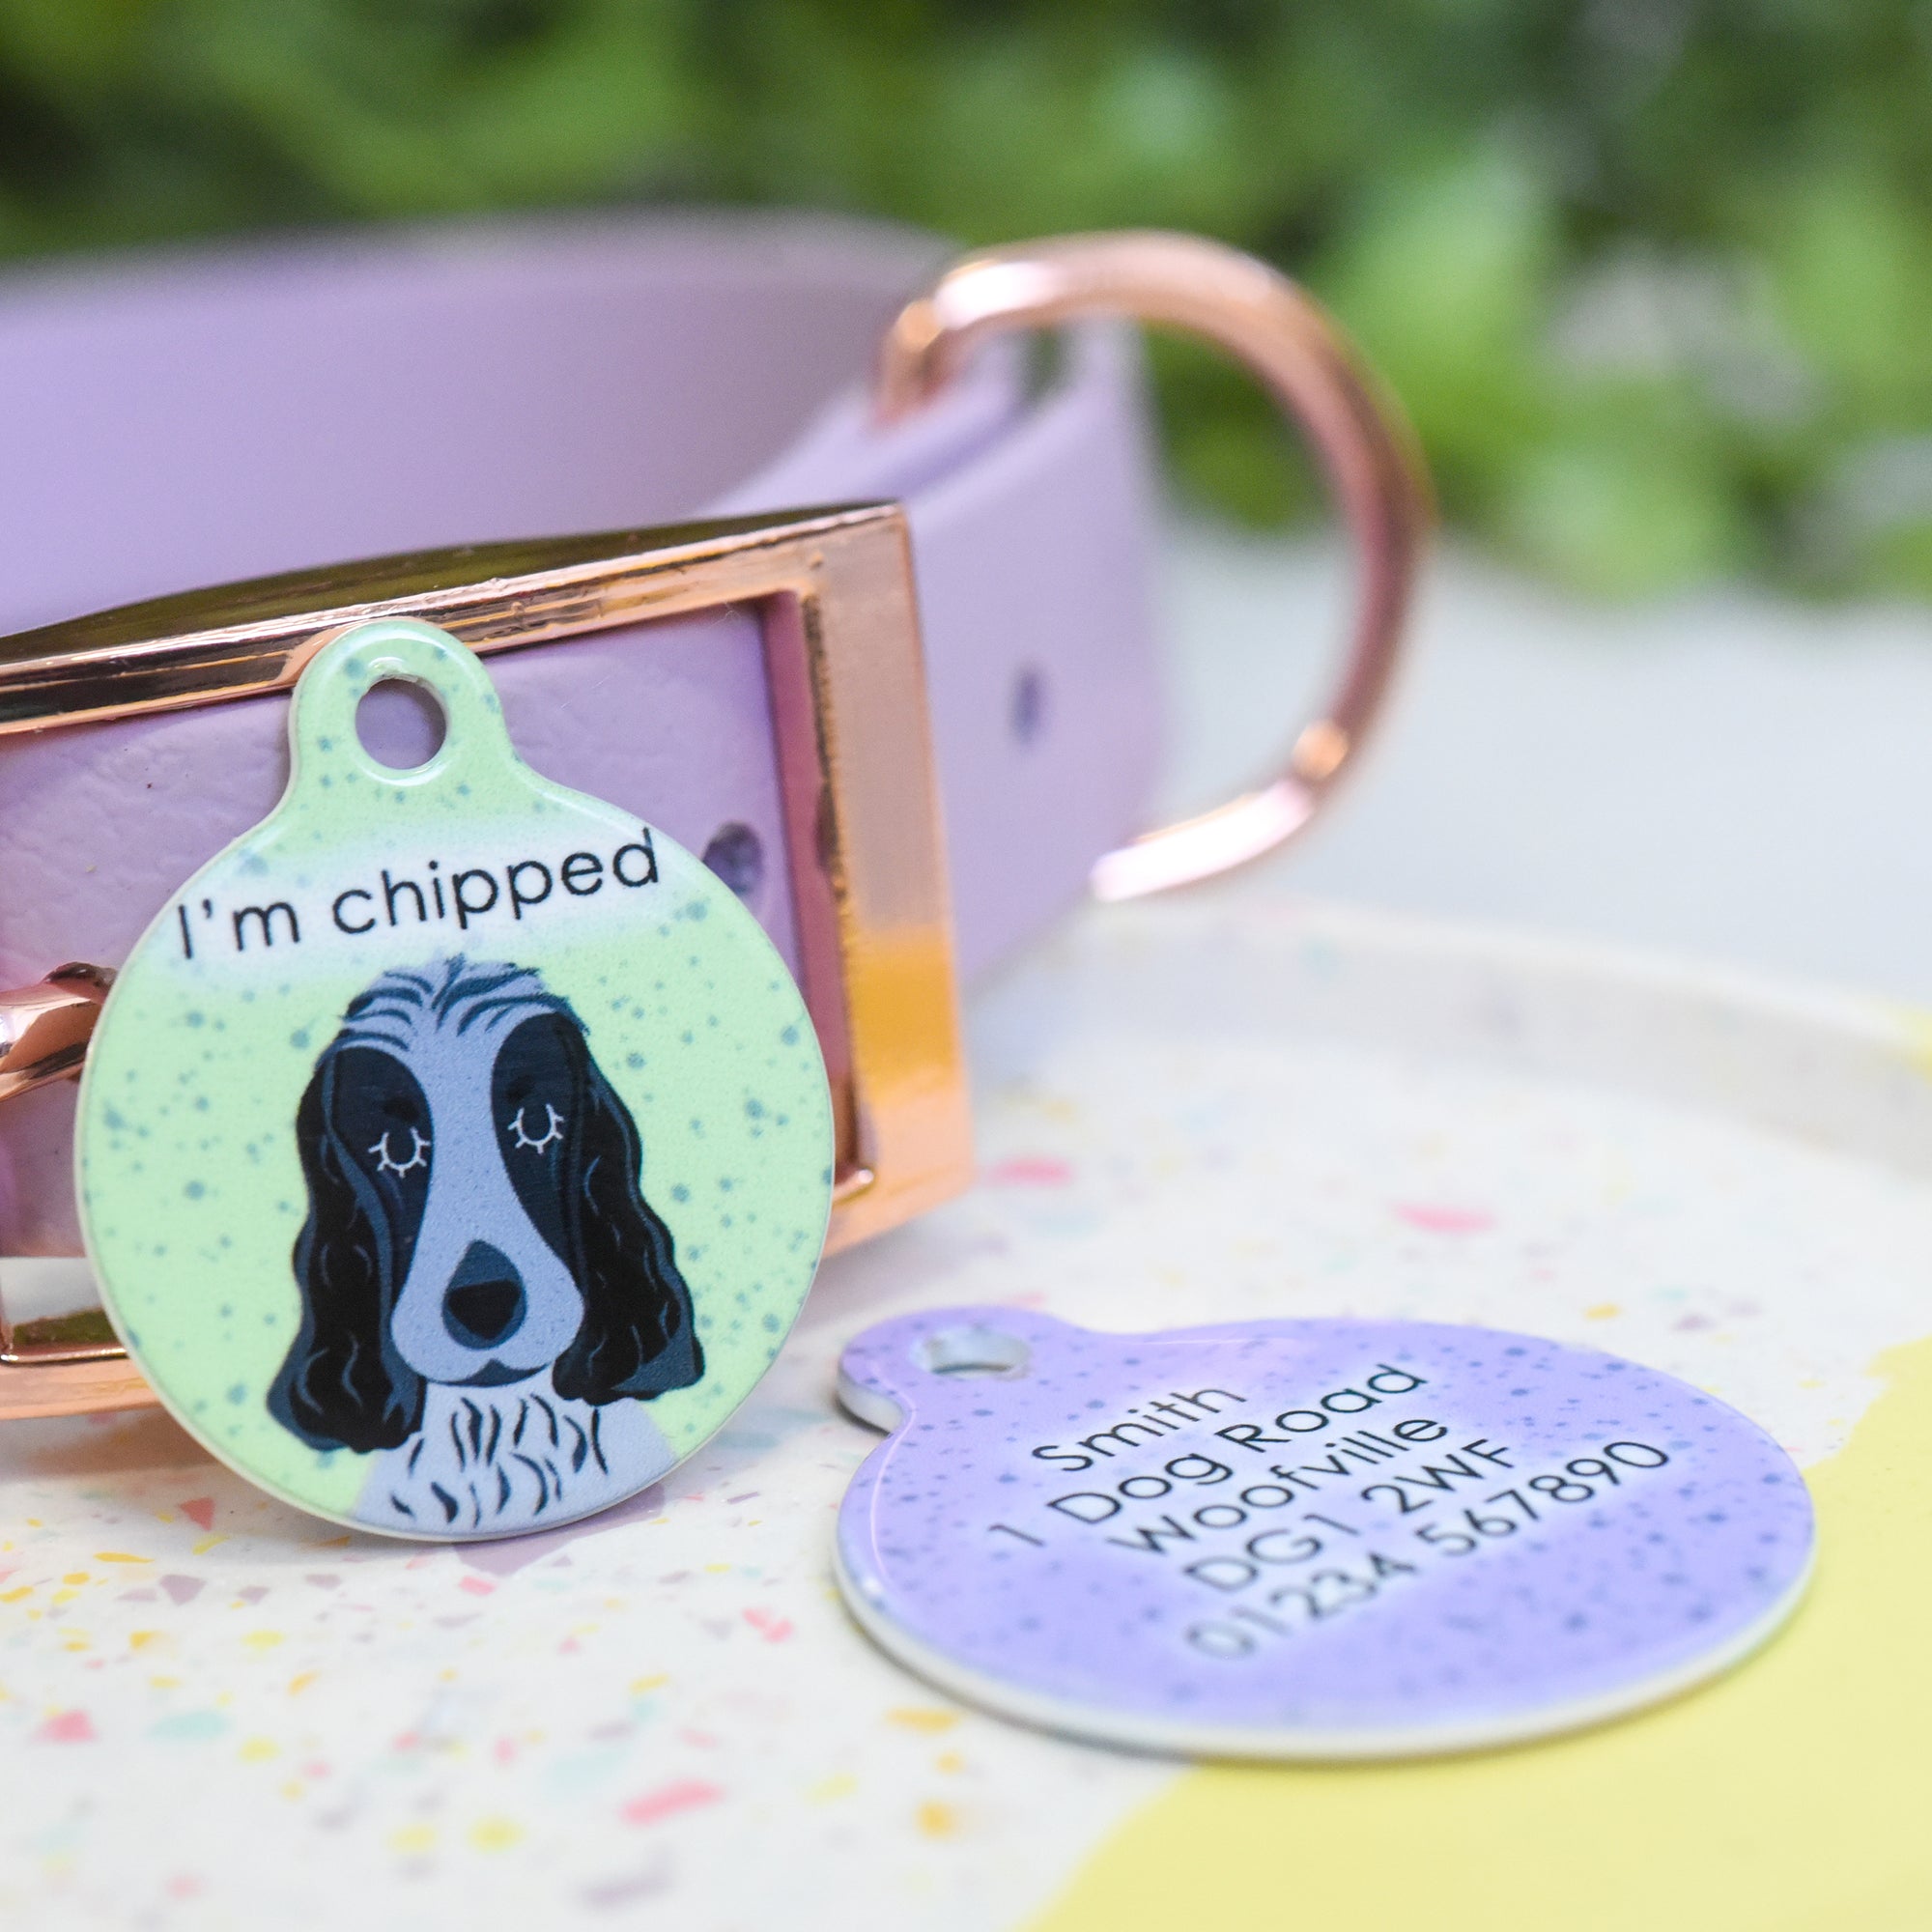 Cocker Spaniel Personalised Dog Tag - Speckled